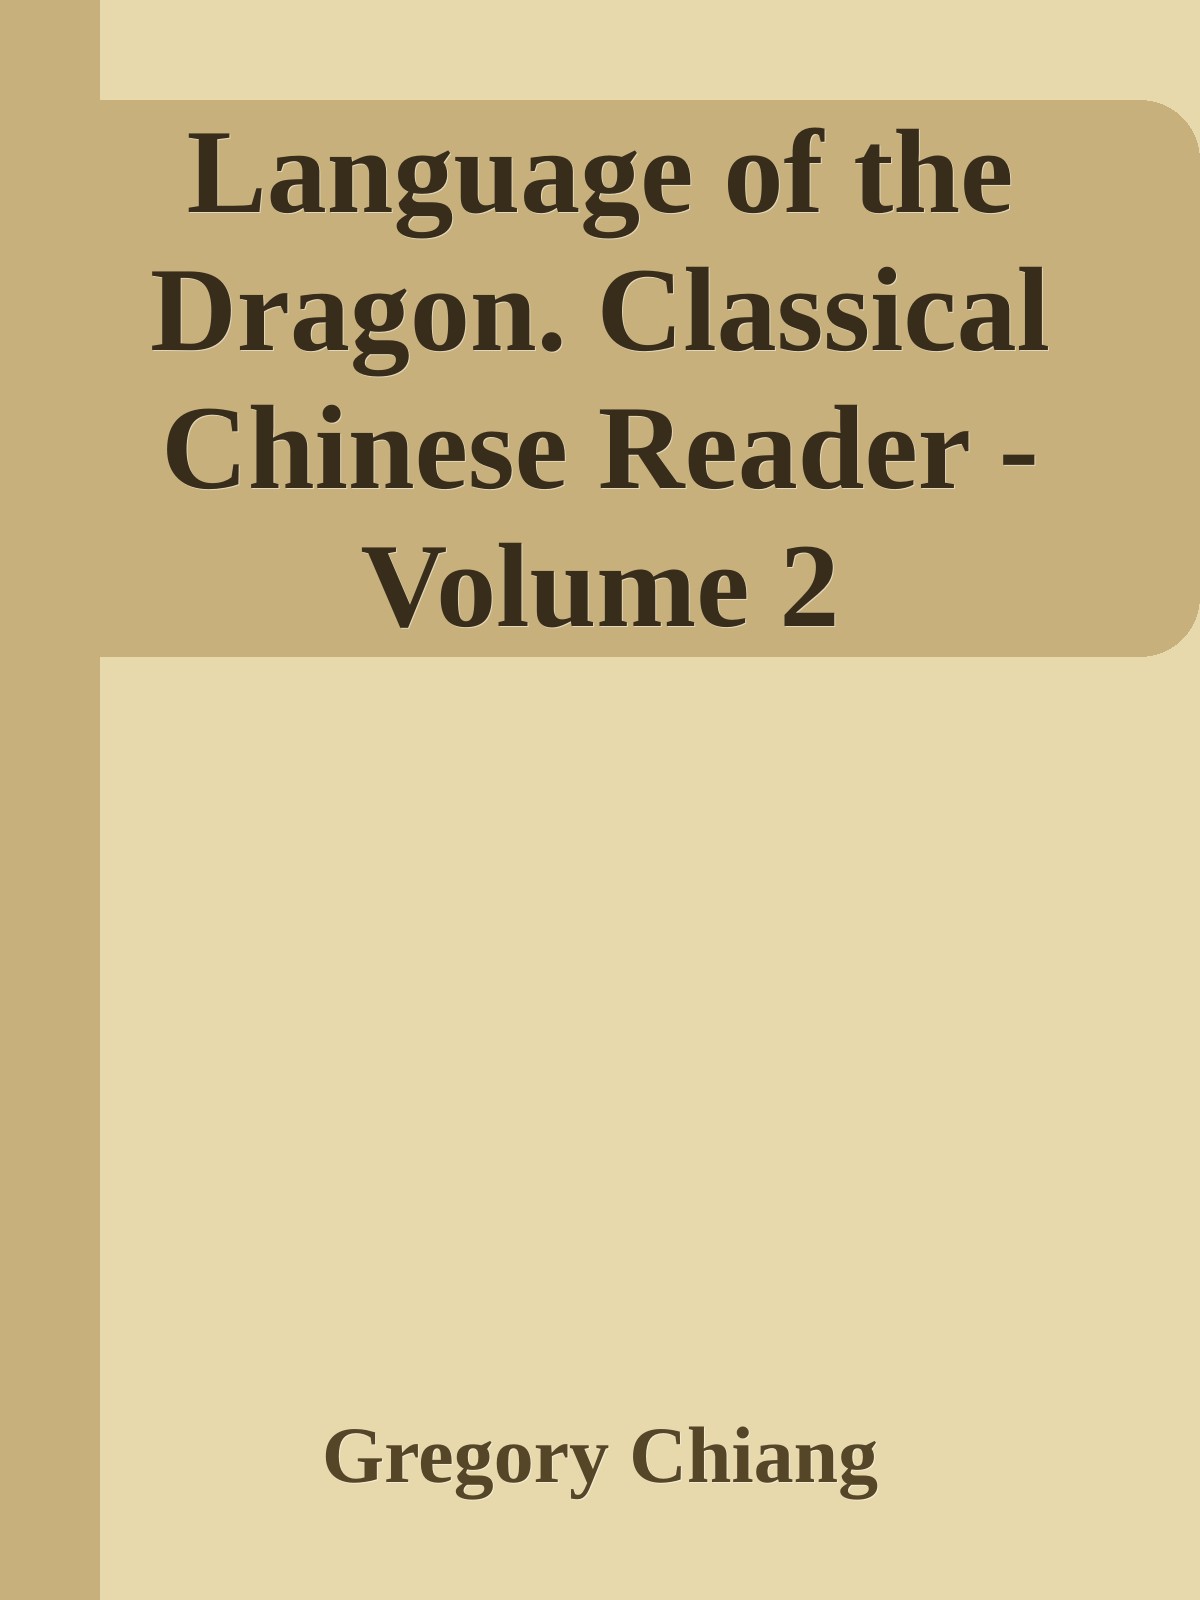 Language of the Dragon. Classical Chinese Reader - Volume 2